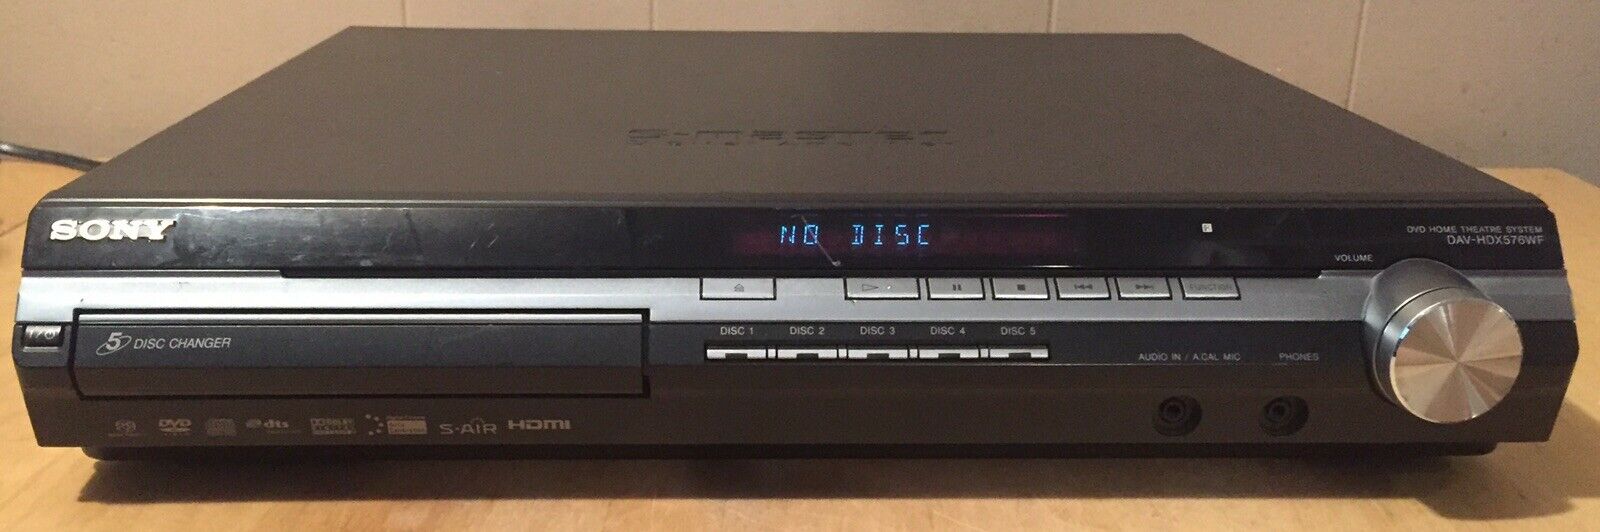 Sony S-Master HCD-HDX576WF 5 Disc DVD/SACD/CD Changer Home Theater Receiver